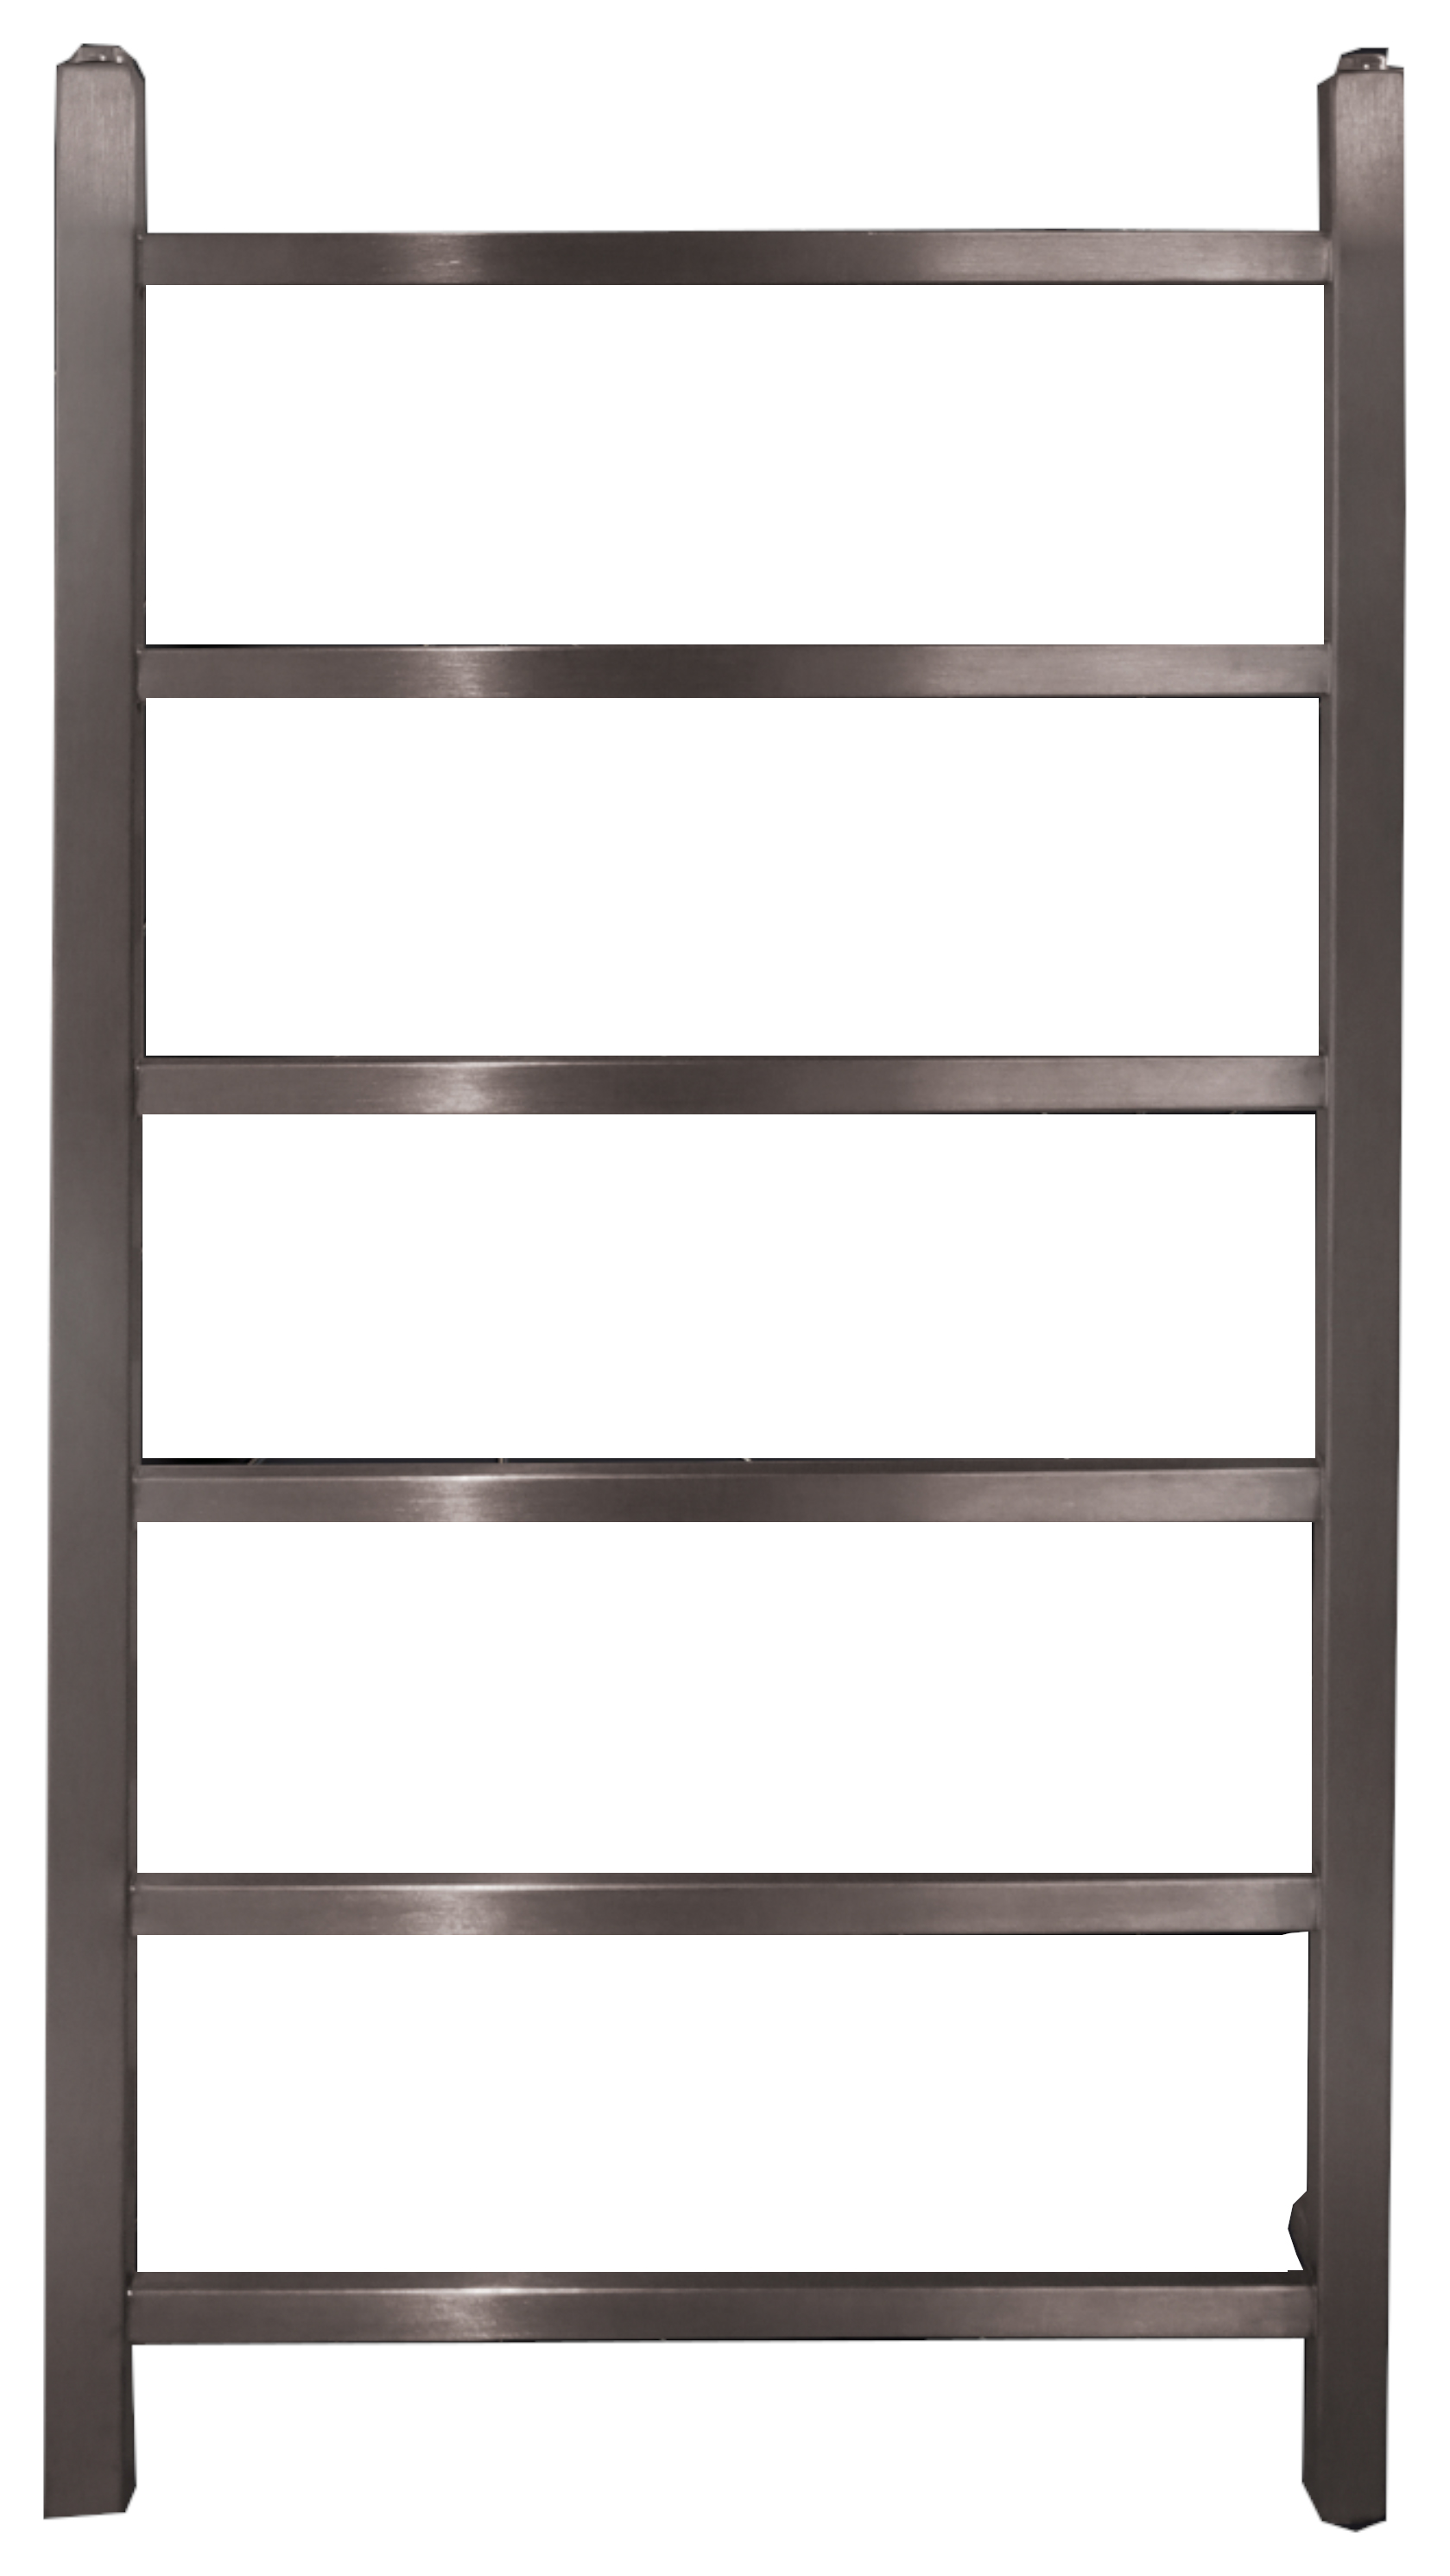 Towelrads Diva Brushed Stainless Steel Dry Electric Non Thermostatic Towel Radiator - 800 x 500mm